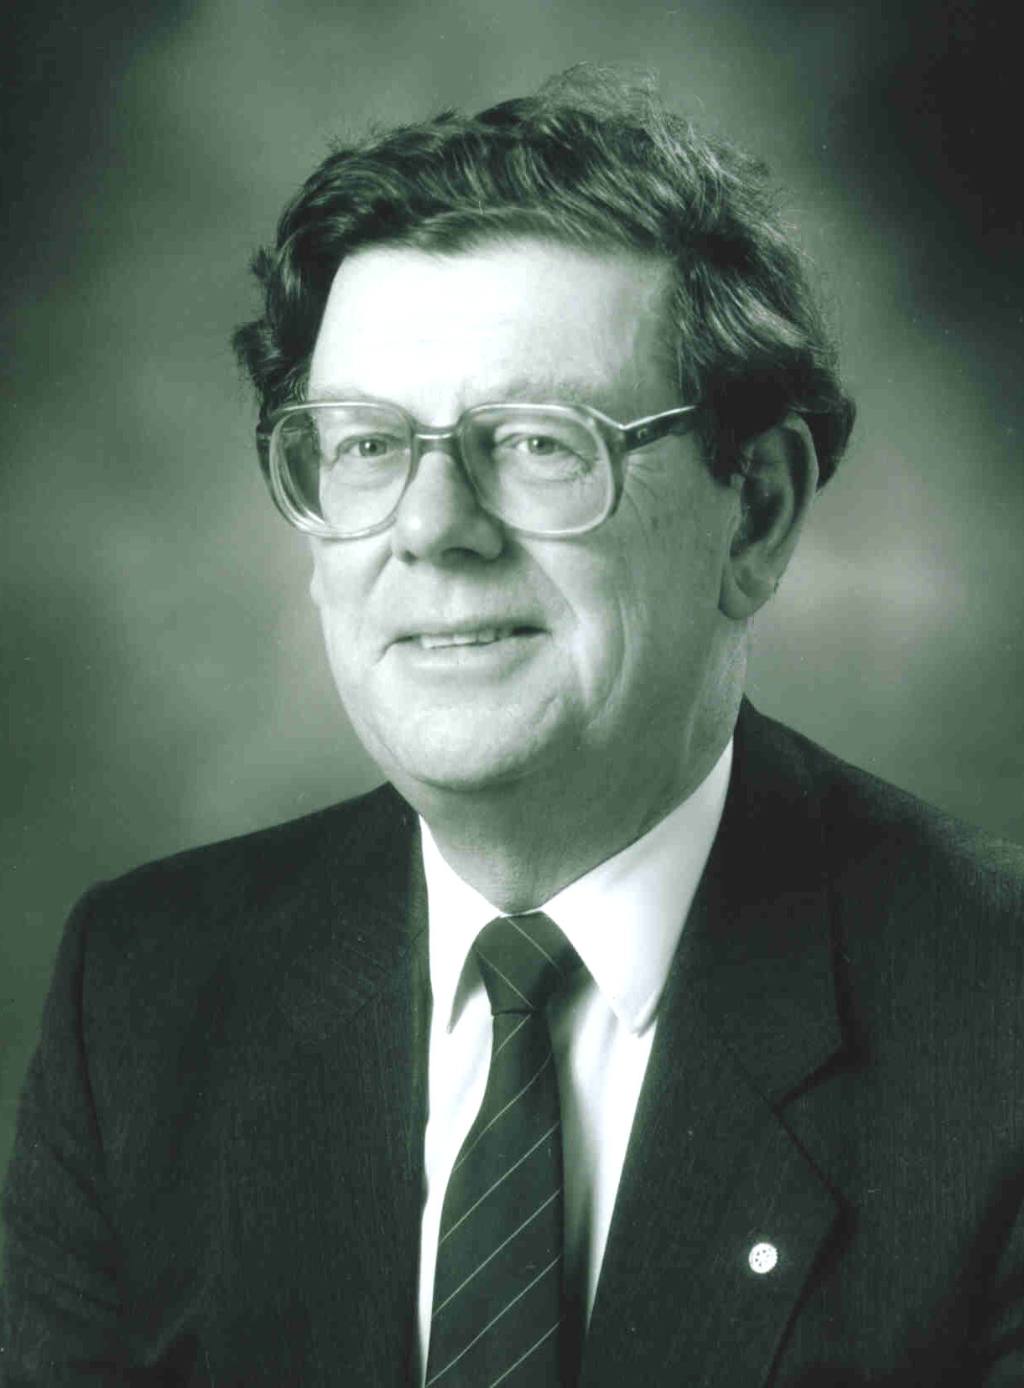 Past Presidents 1990-1999 (click here) - Kenneth. B. Clarke 1993/4